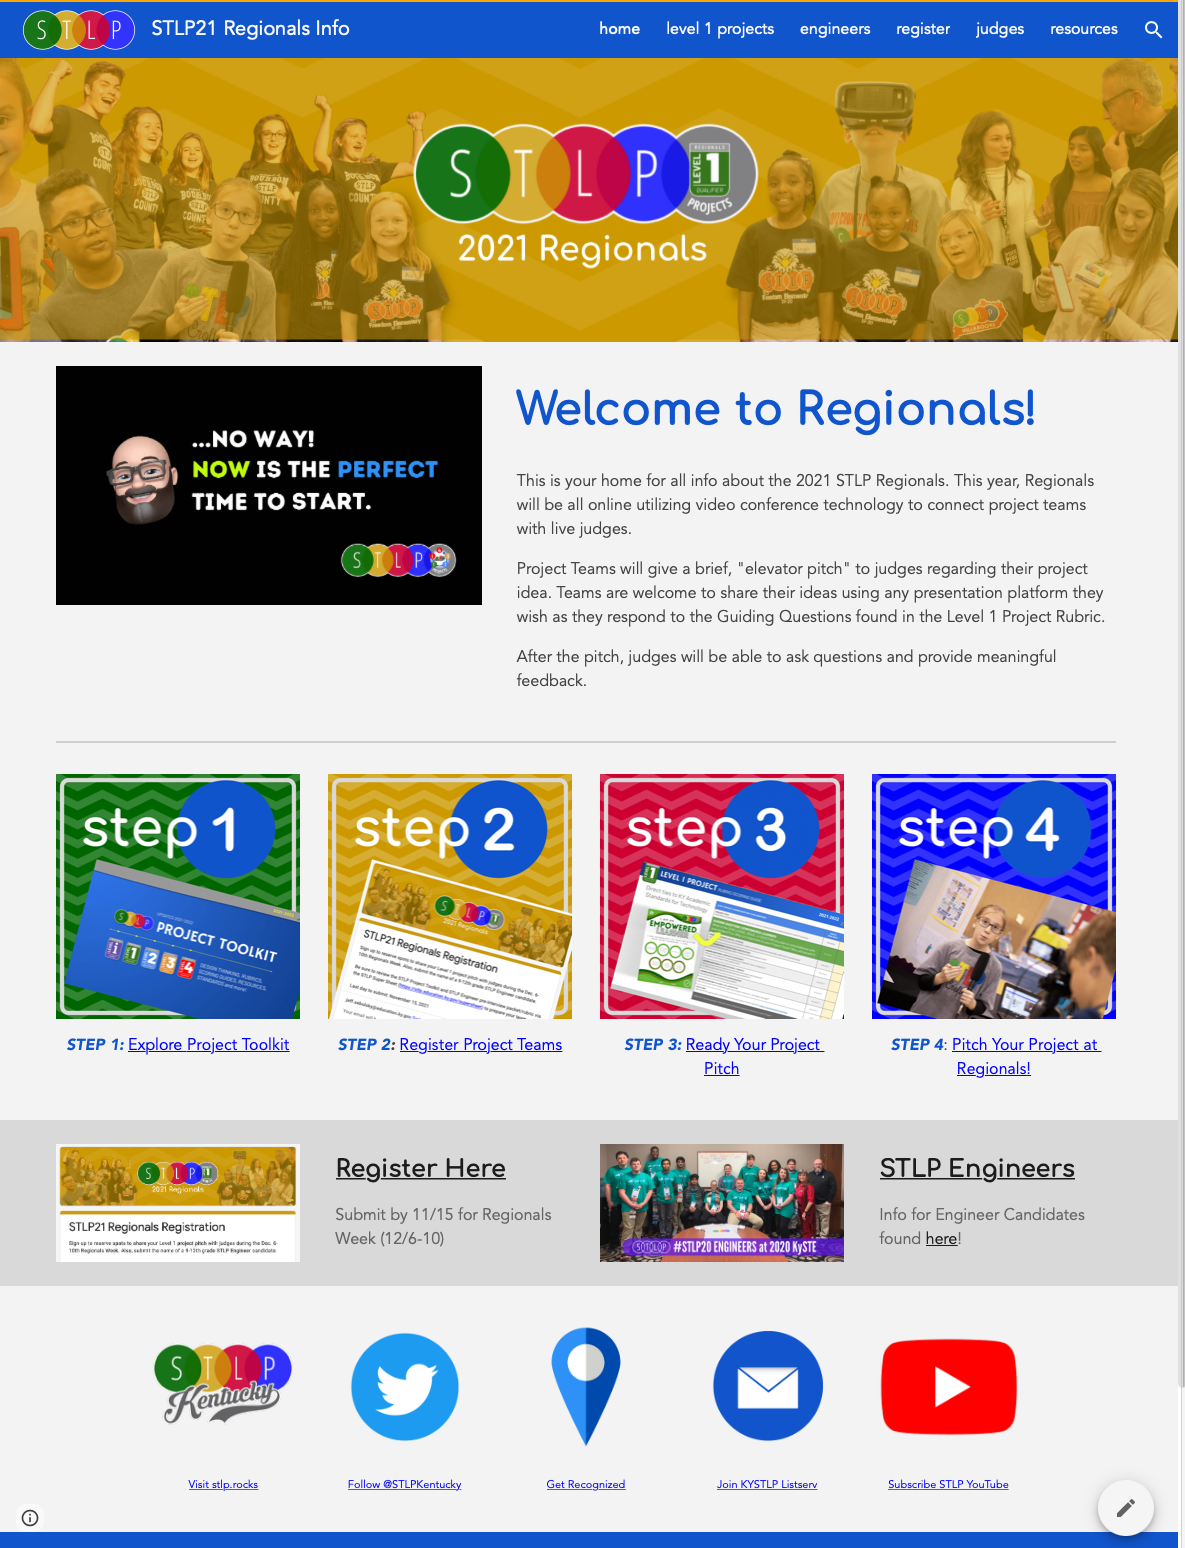 Link to STLP21 Regionals Info Page - click here